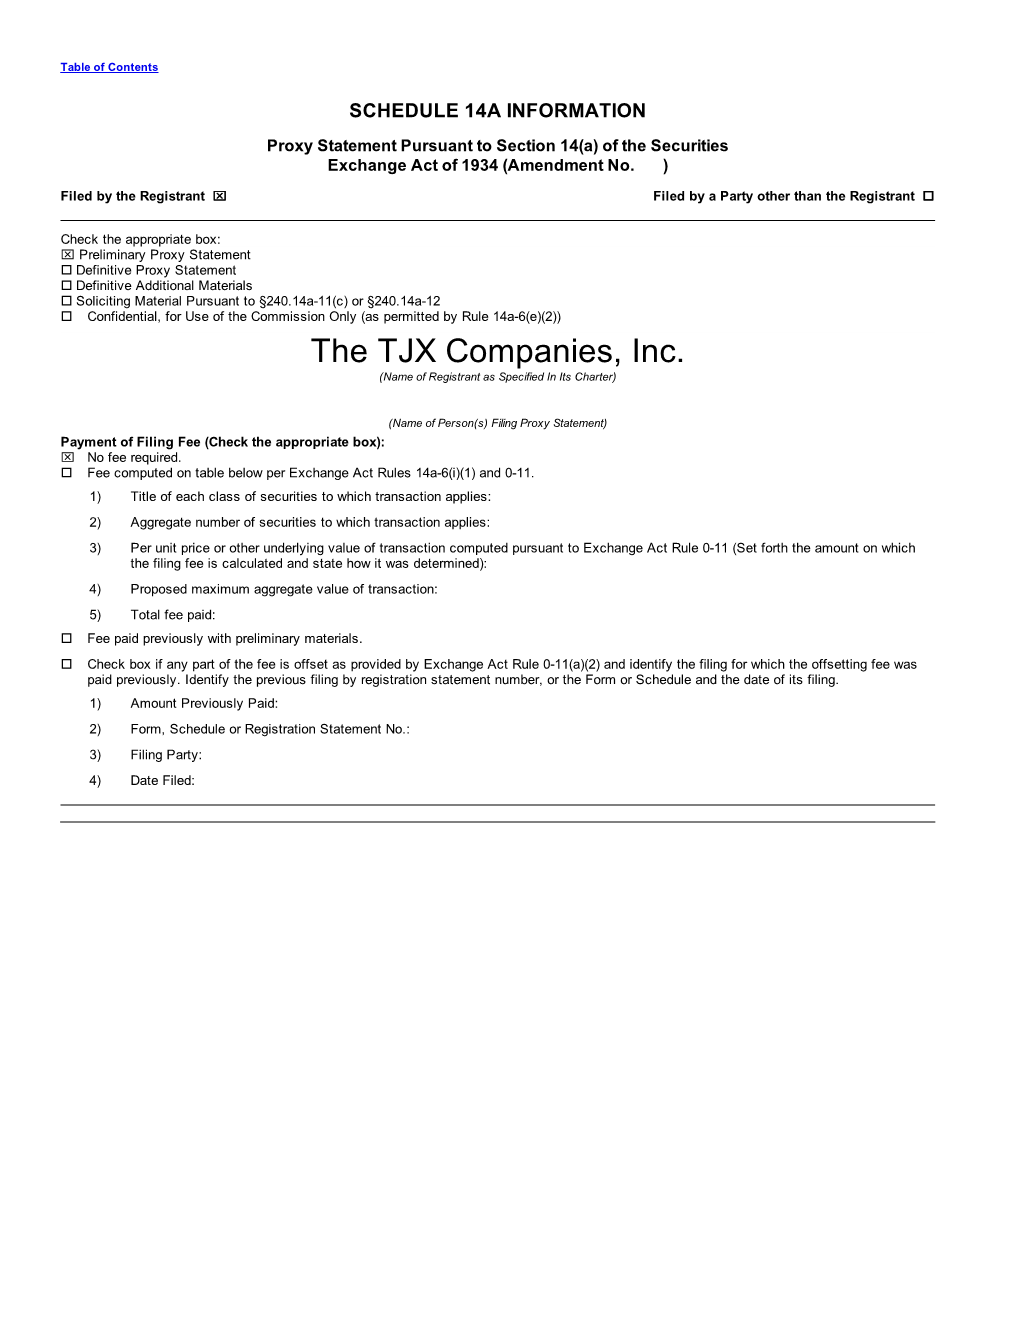 The TJX Companies, Inc. (Name of Registrant As Specified in Its Charter)